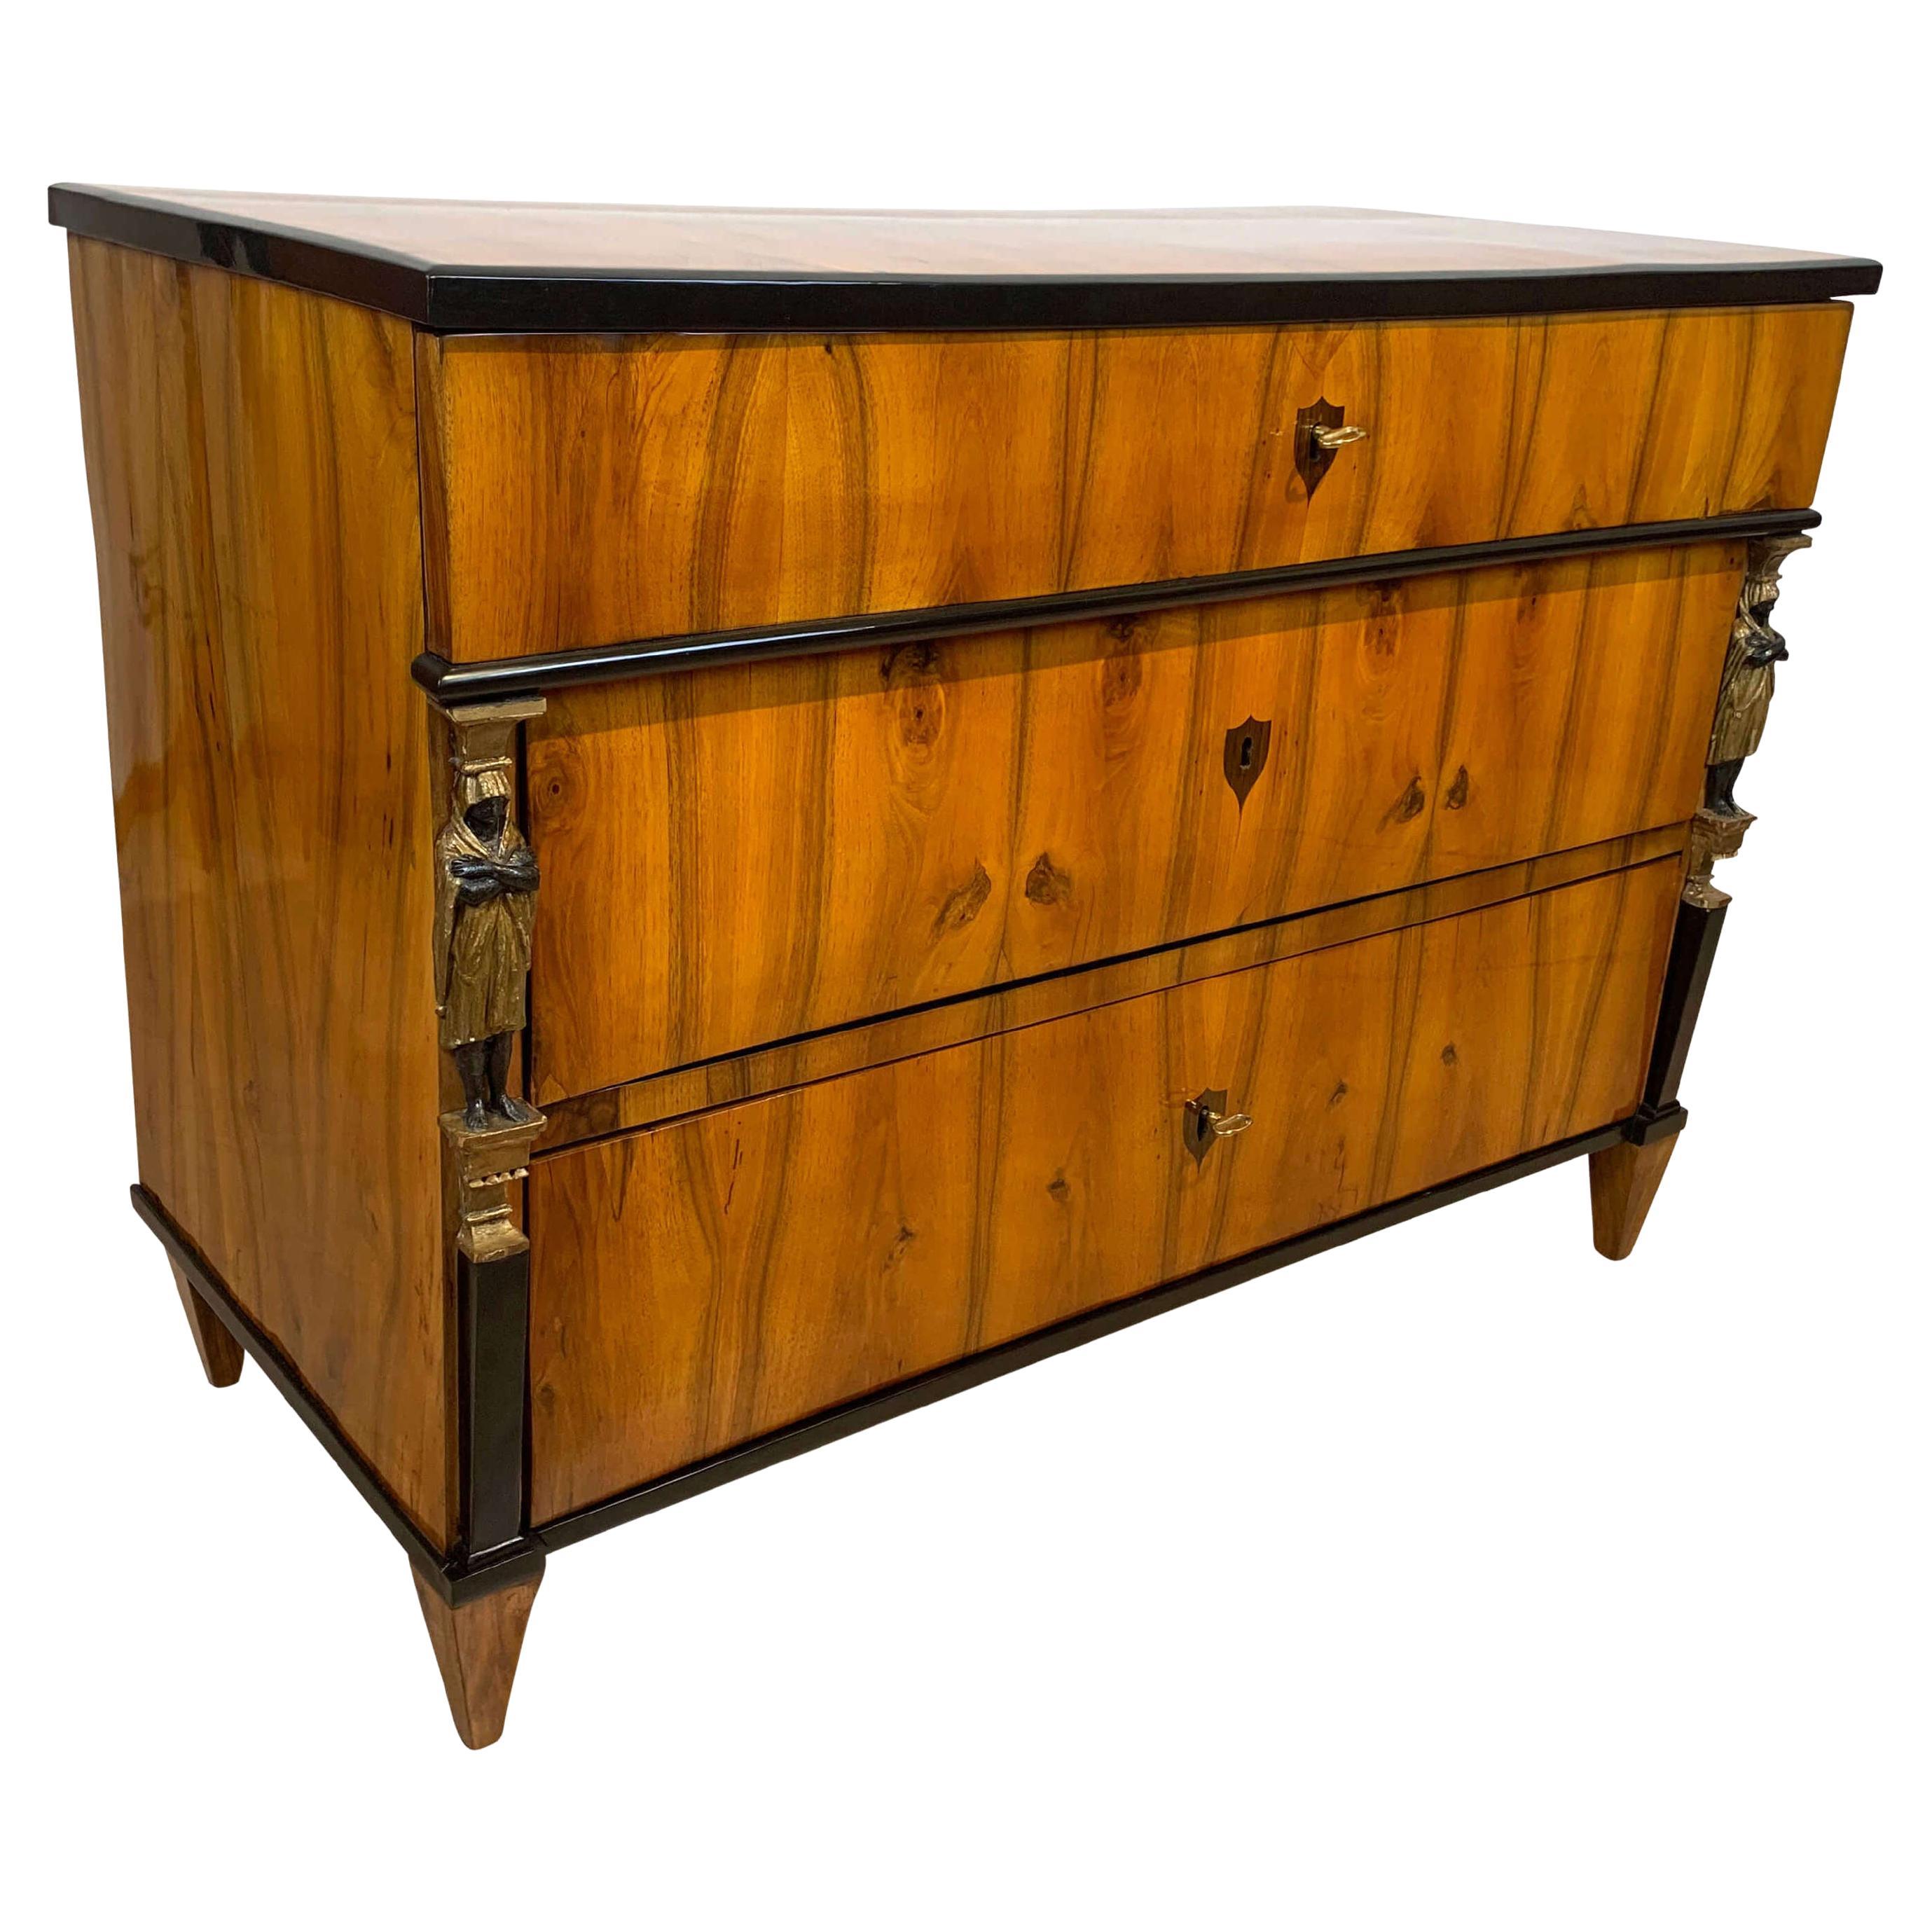 Very fine original Empire commode or chest of three drawers, walnut veneered with Caryatid pilaster columns, from Austria/Vienna about 1810-15.
 
Lovely book-matched Walnut Veneer on softwood. Excellent french polished surface.
Exceptional carved